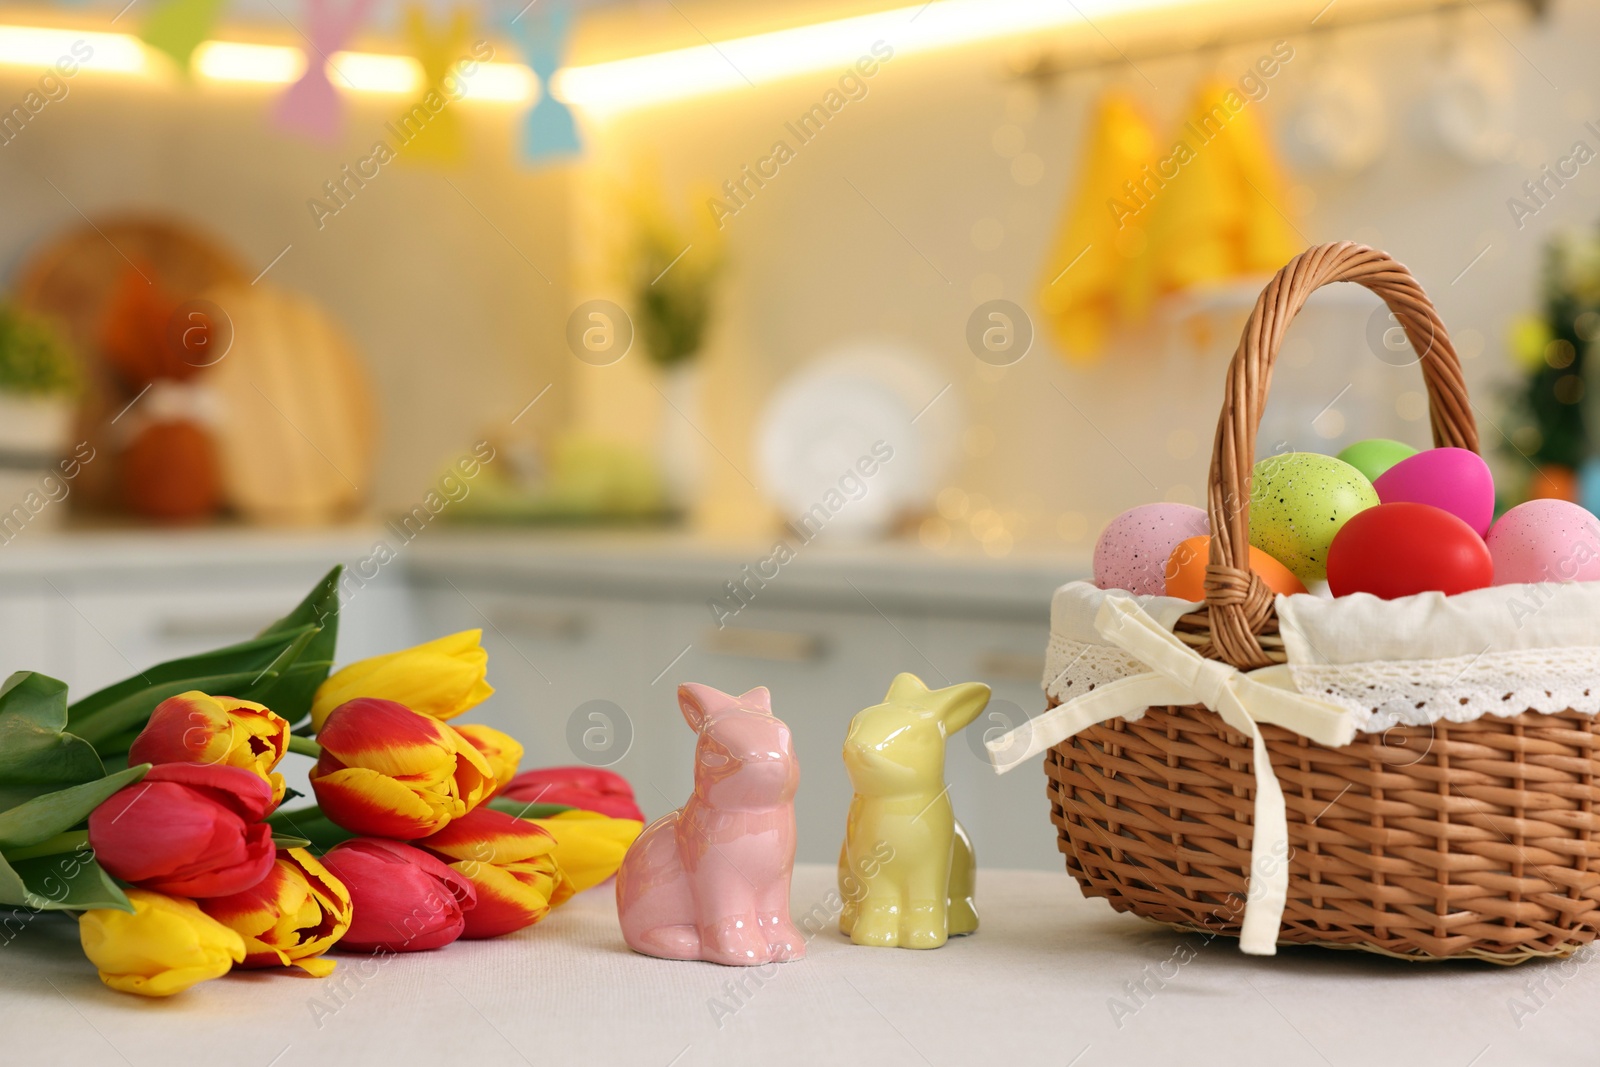 Photo of Easter decorations. Wicker basket with painted eggs, tulips and bunny figures on white table indoors, closeup